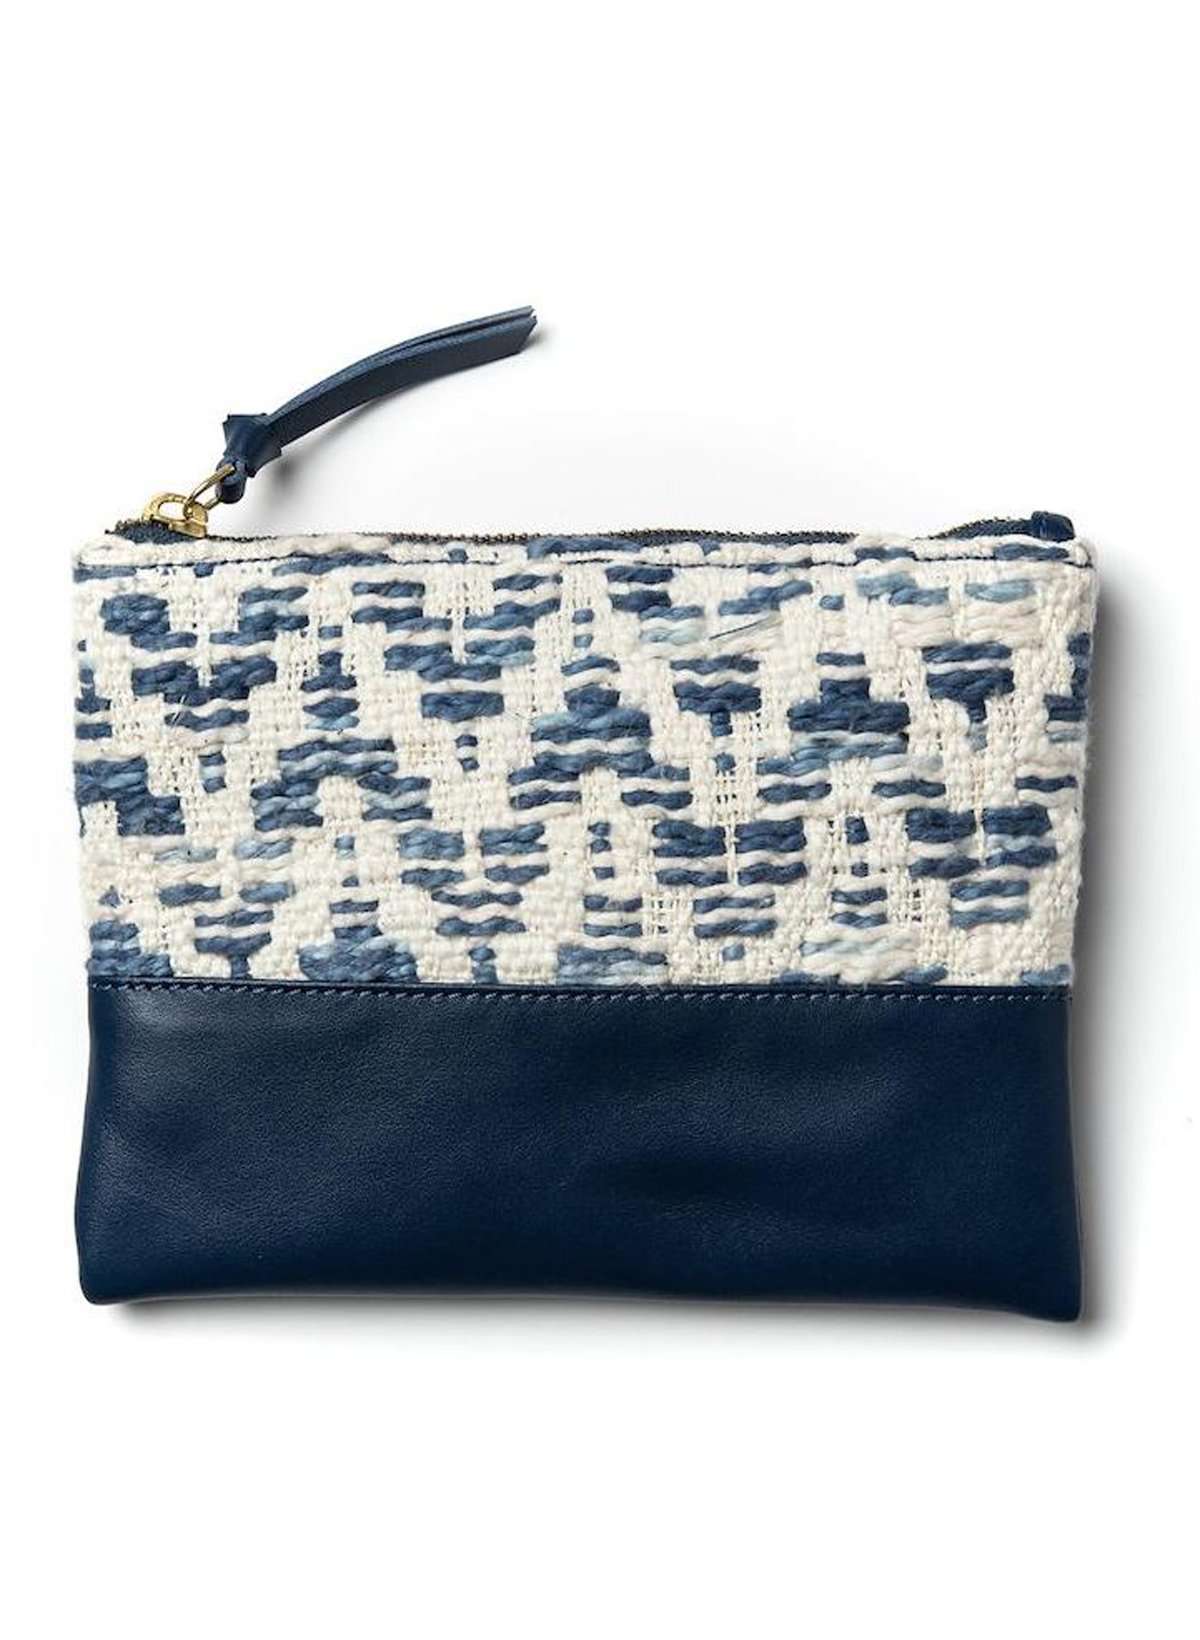 Affordable black cosmetic bag modest gifts